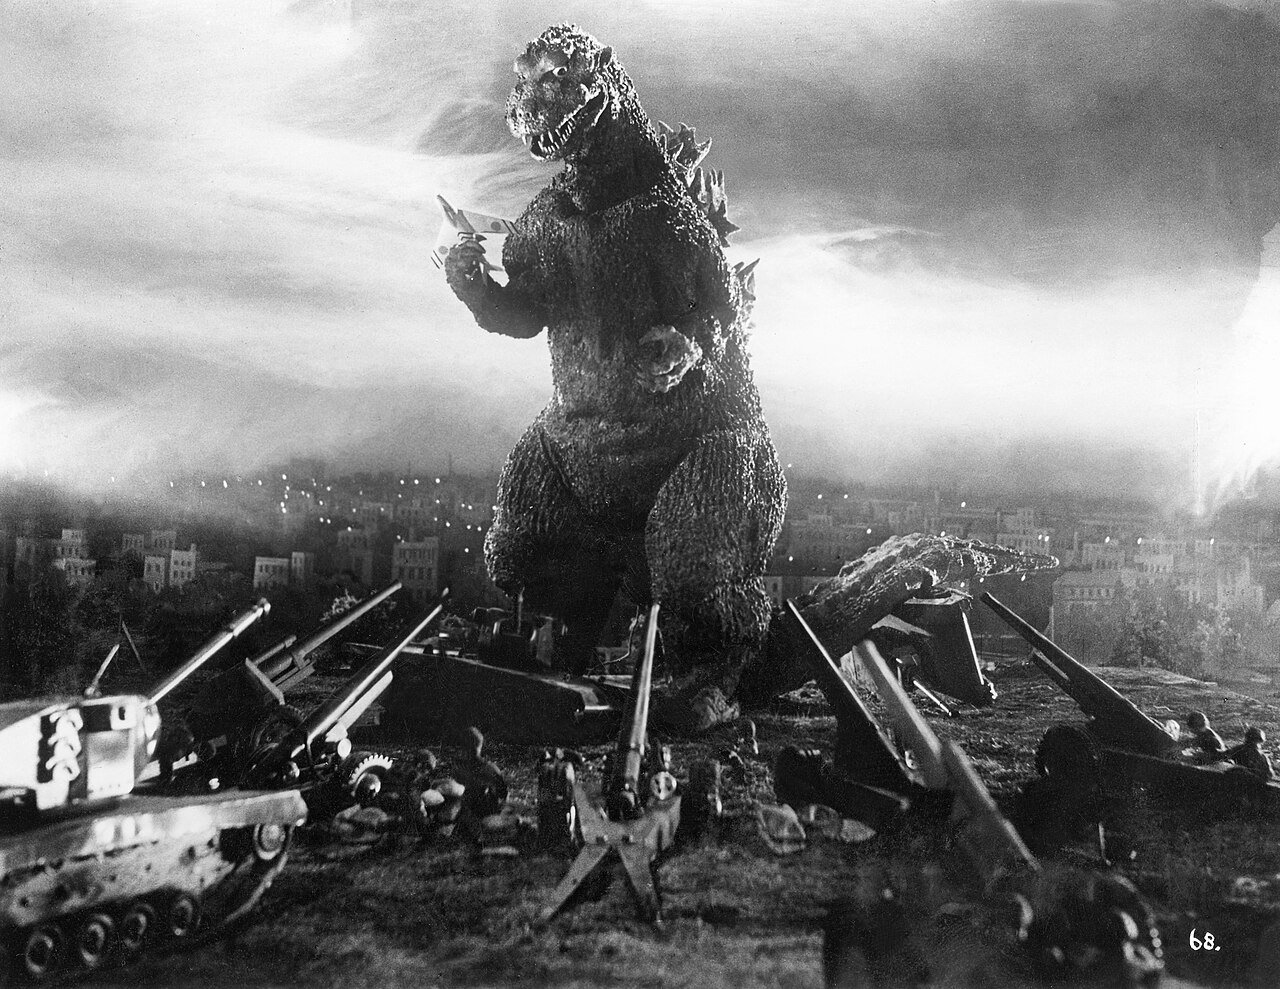 Godzilla holding a fighter jet in his hand and being fired upon by tanks